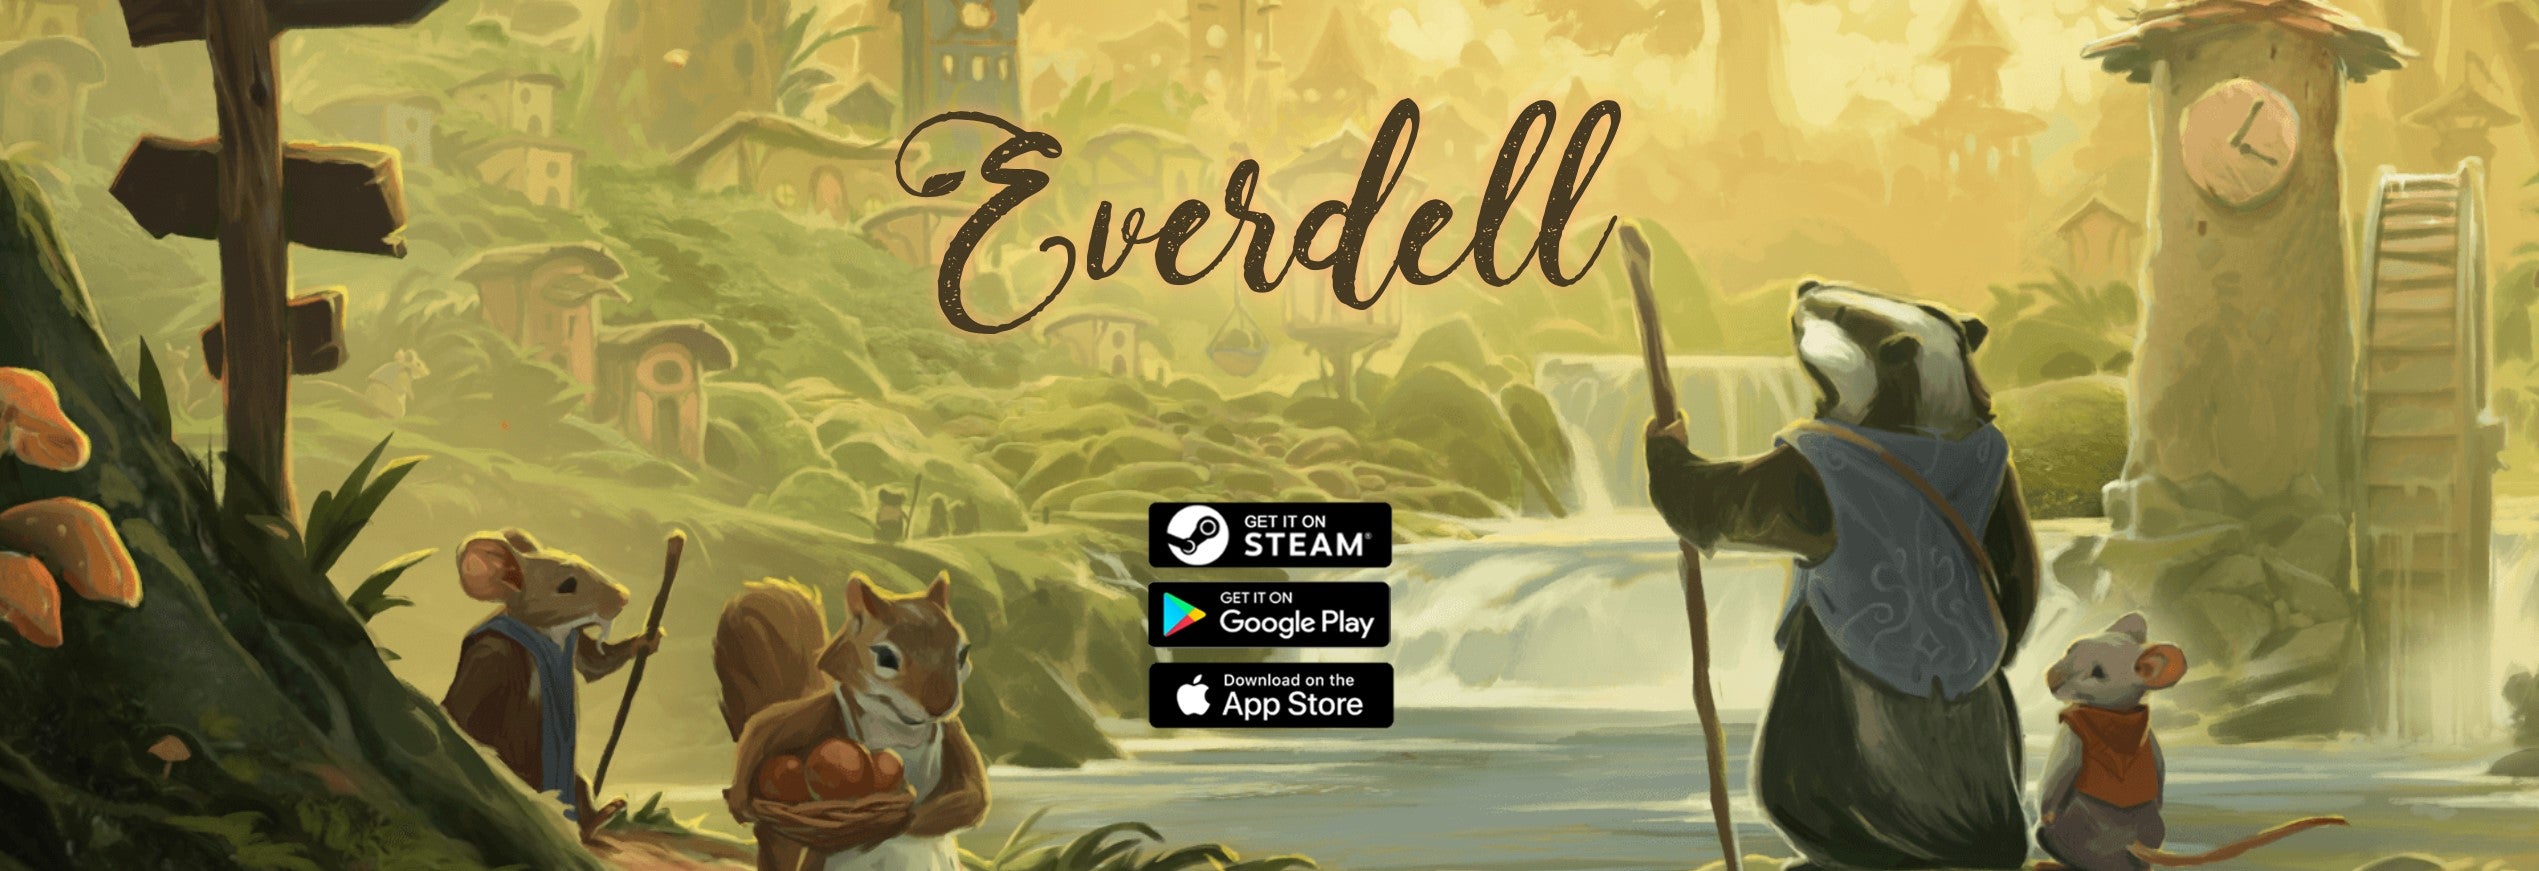 Everdell Digital Edition from Dire Wolf Digital available on Steam, Google Play, and the Apple App Store.  The harvester and gather walking along a river.